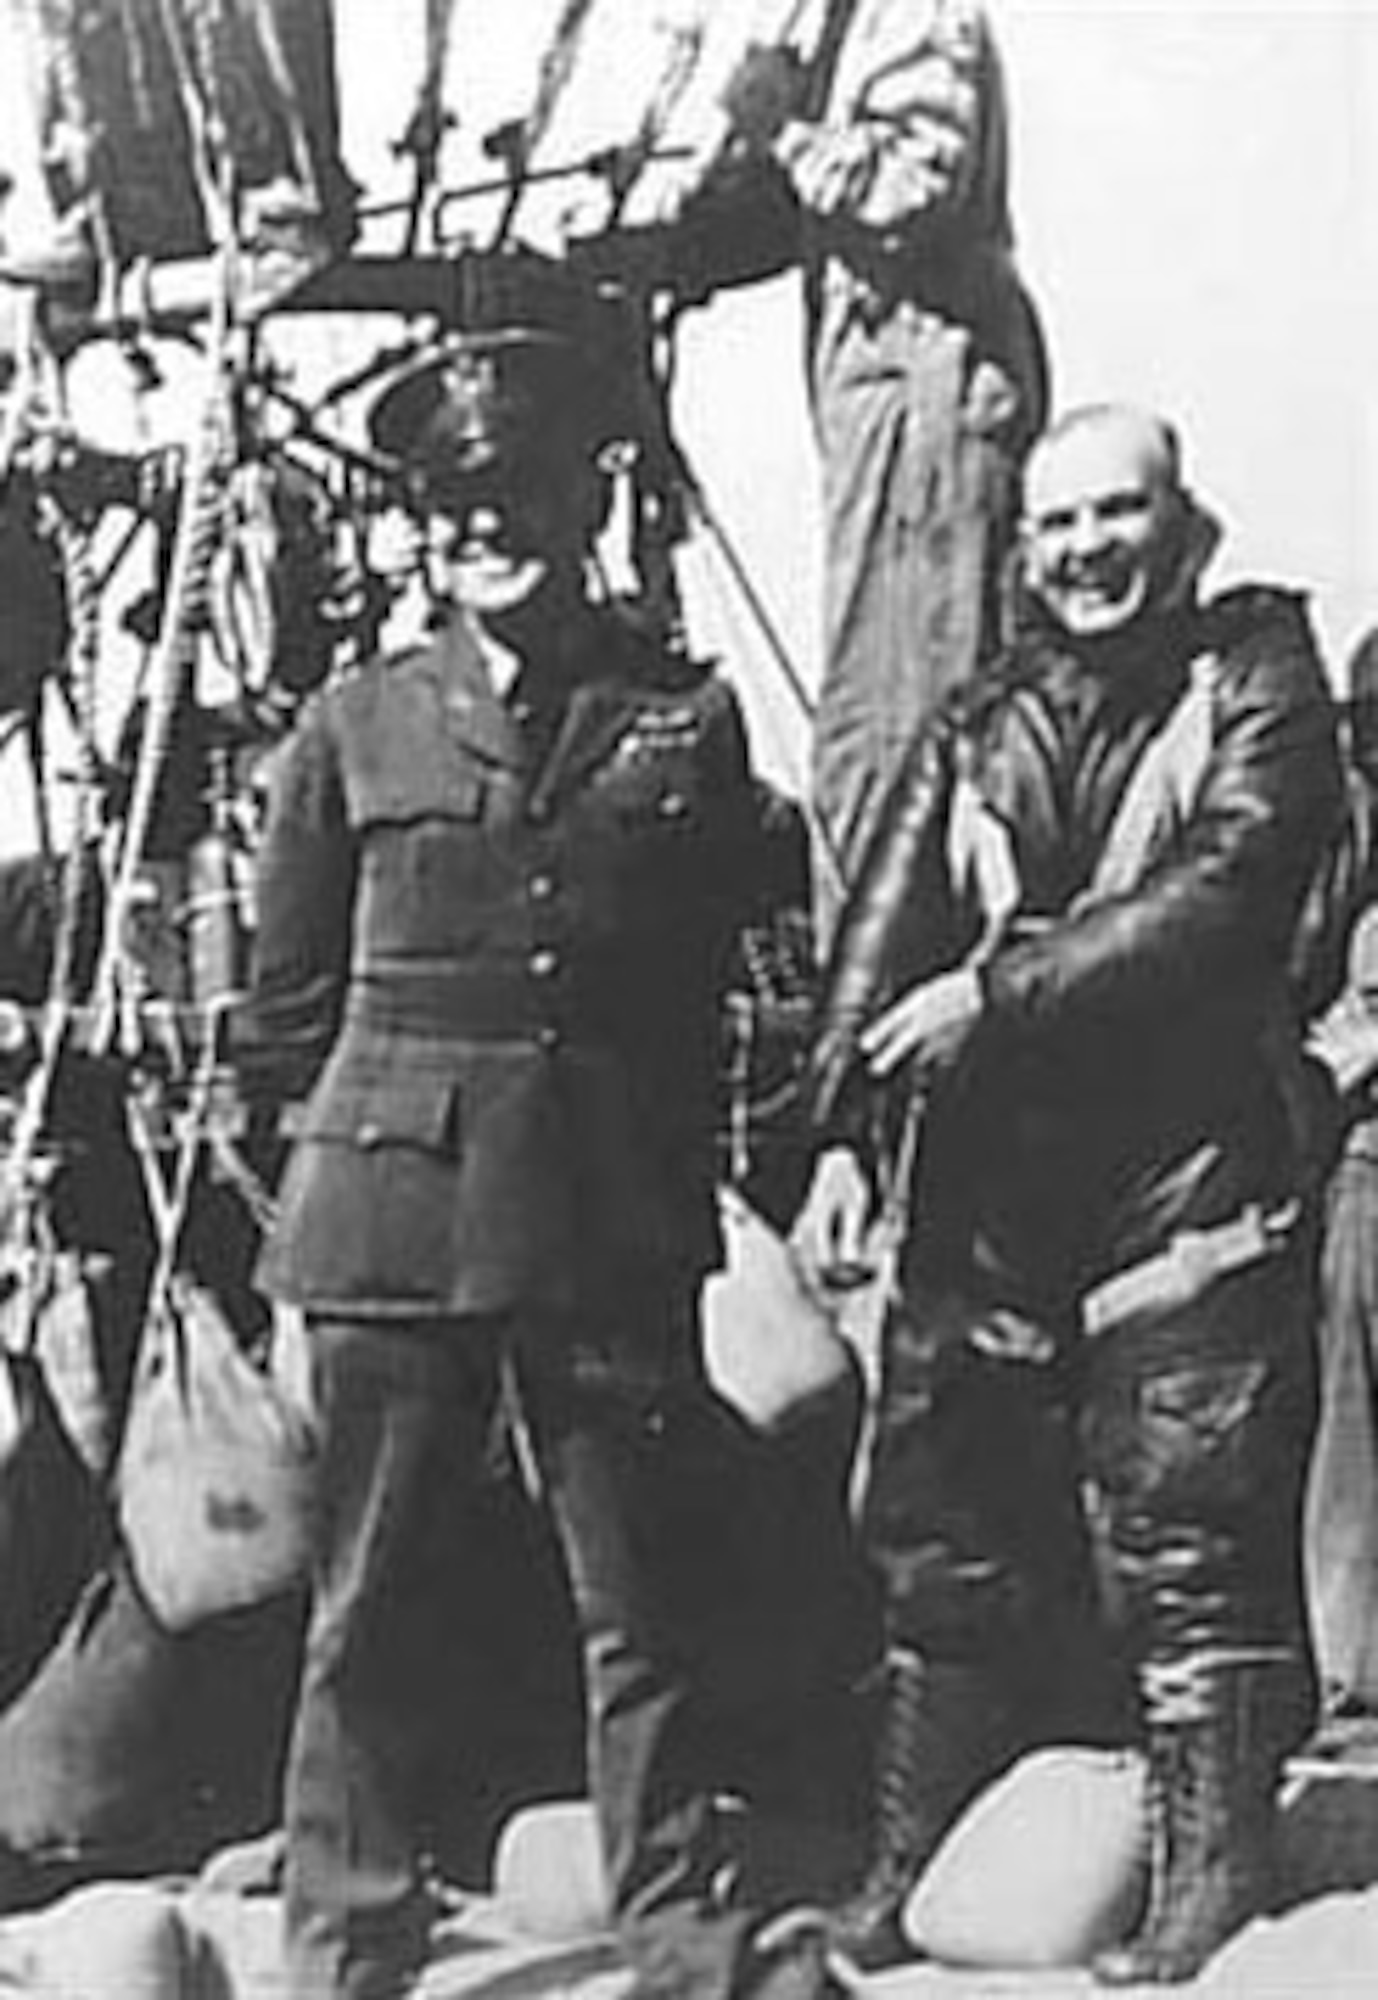 Capt. H.C. Gray (in flight suit) prior to his ascent on March 9, 1927. (U.S. Air Force photo)